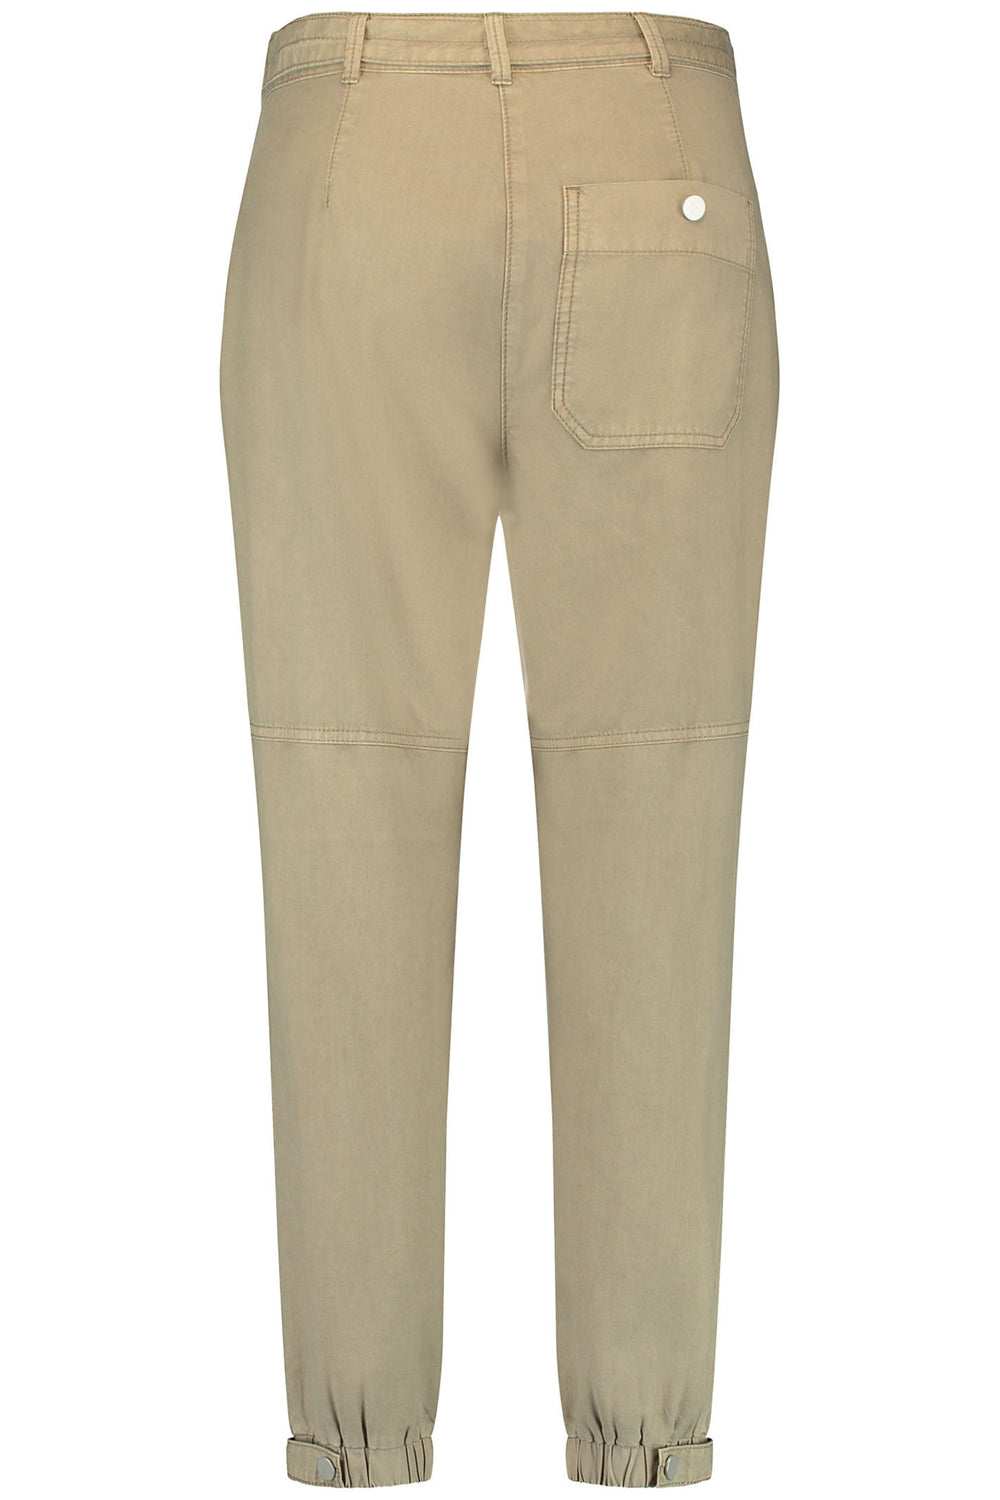 Gerry Weber 222129 Dune Sand Chino Trousers - Experience Boutique